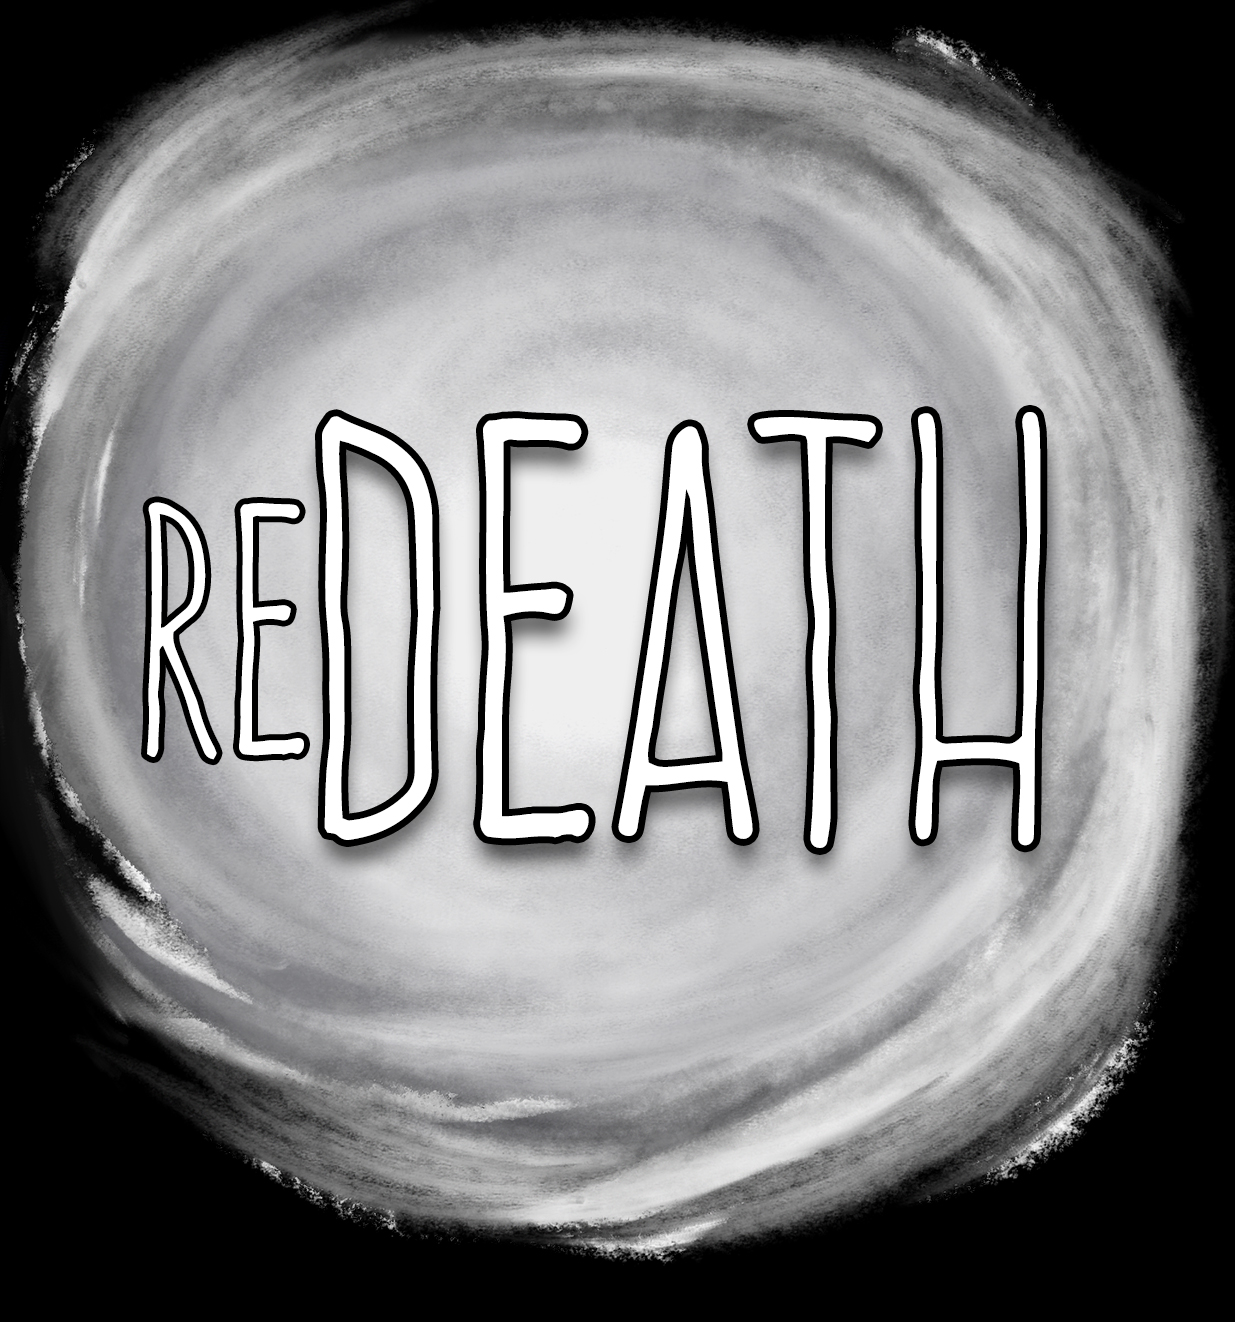 ReDeathSmall